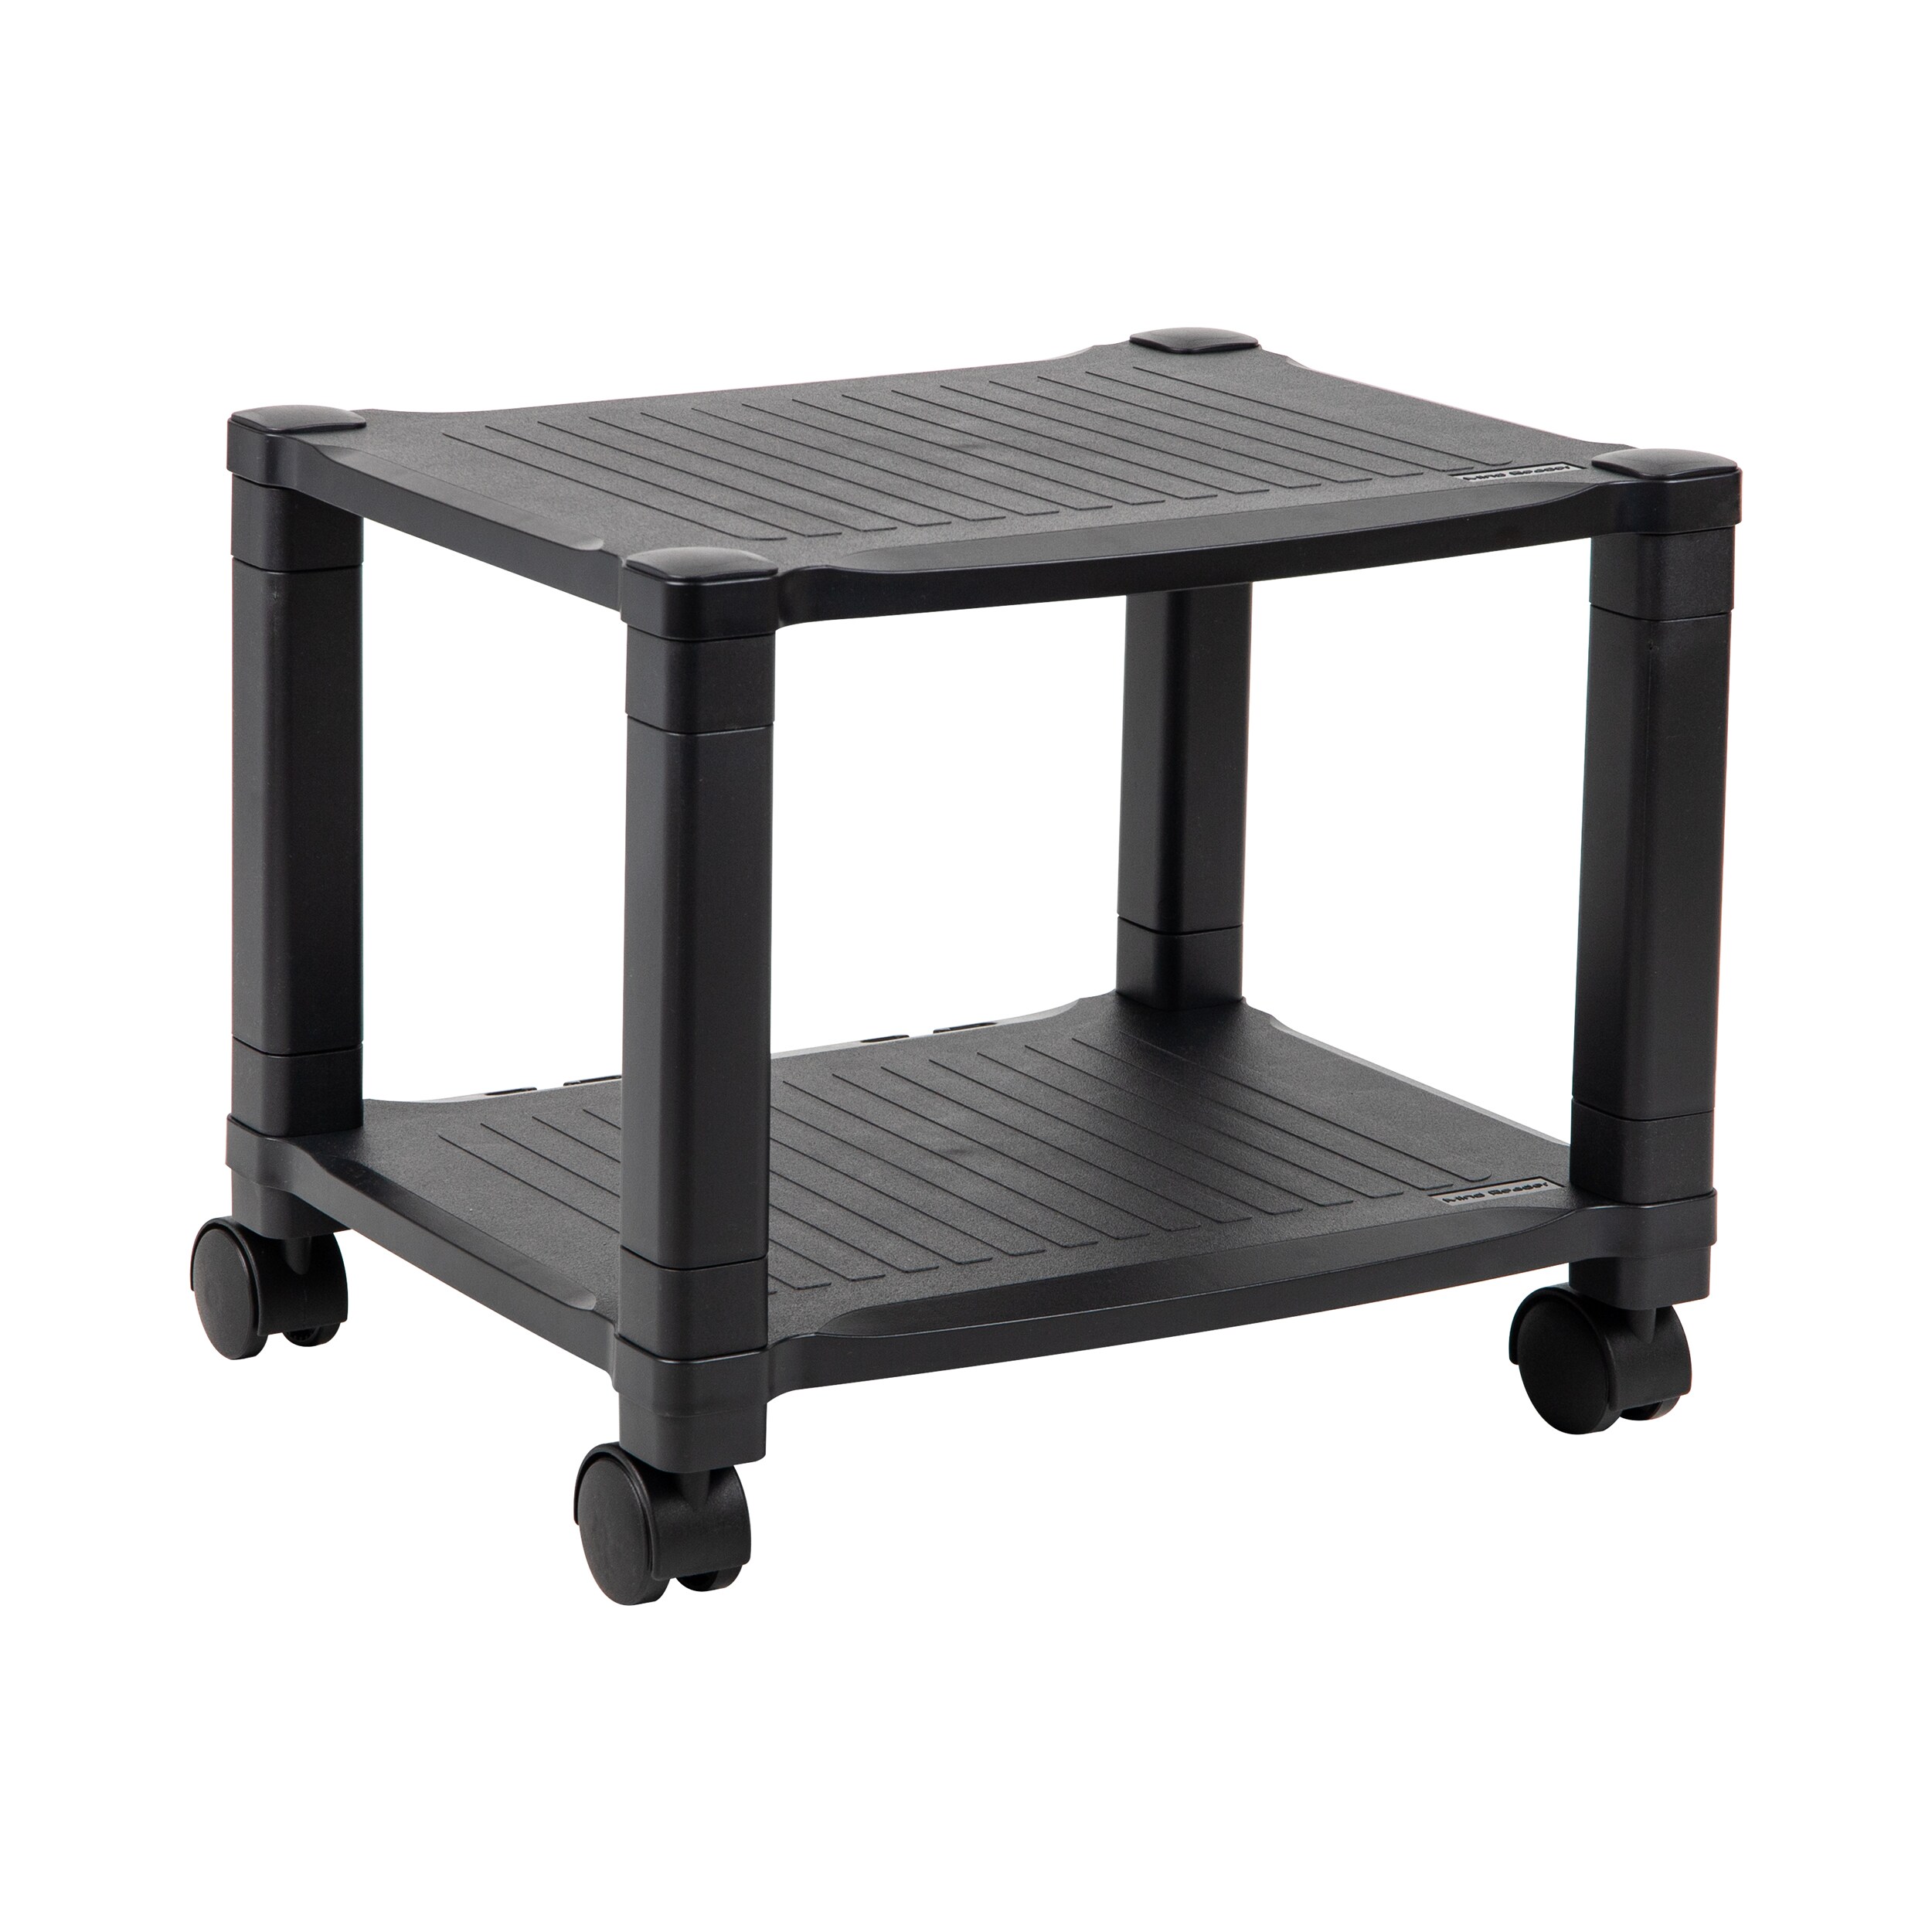 20 Inch Square End Table, 2-Tier Mini Fridge Printer Stand with Lockable  Wheels, Metal Wood